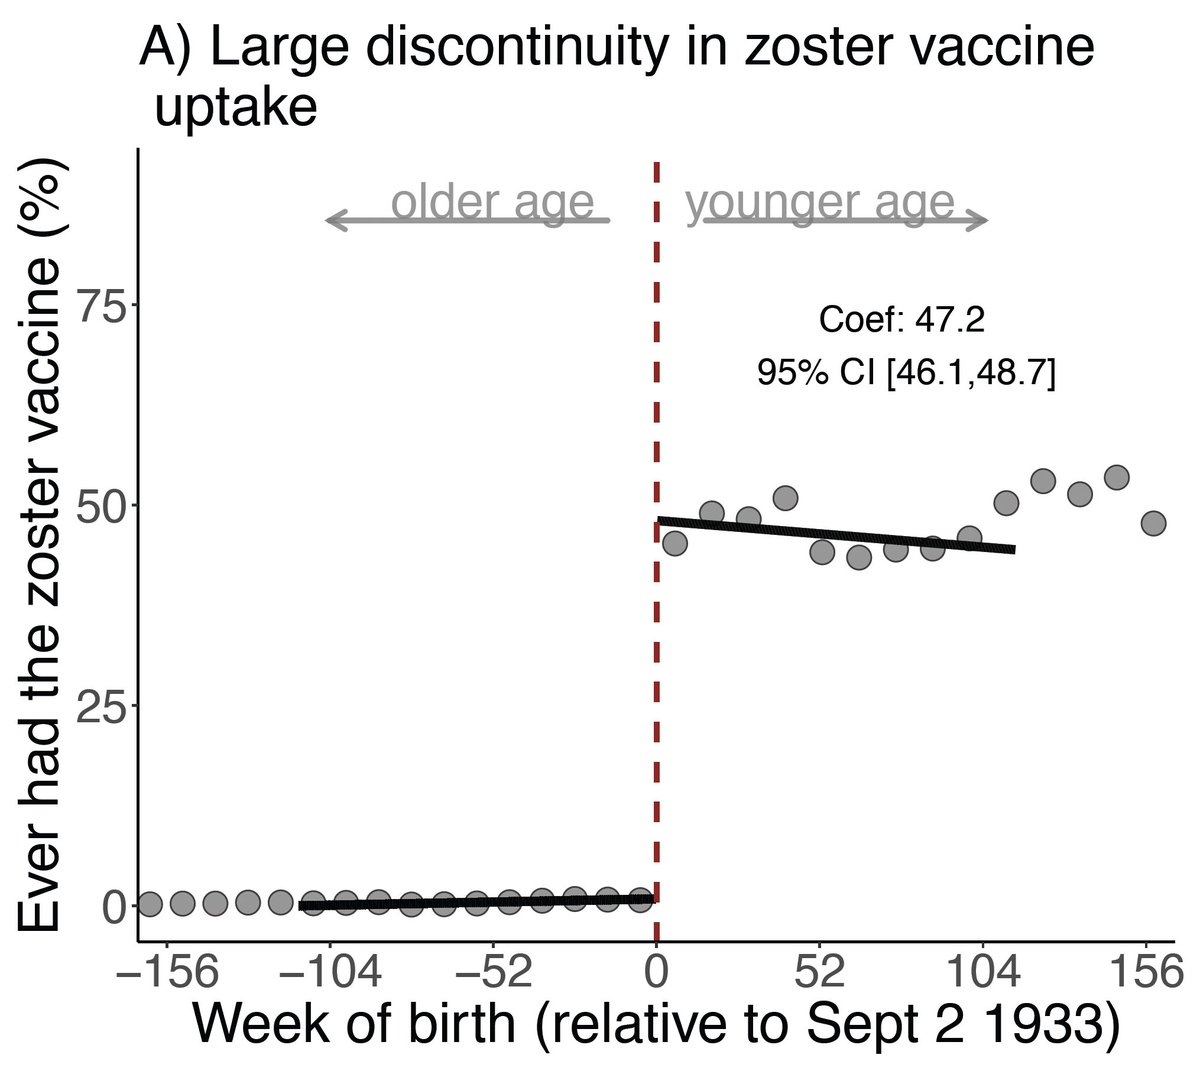 We first show that just a one-week difference in age causes a massive (47 %-point) difference in the probability of ever getting the vaccine. 

This is paradise for getting at CAUSATION rather than correlation!

4/